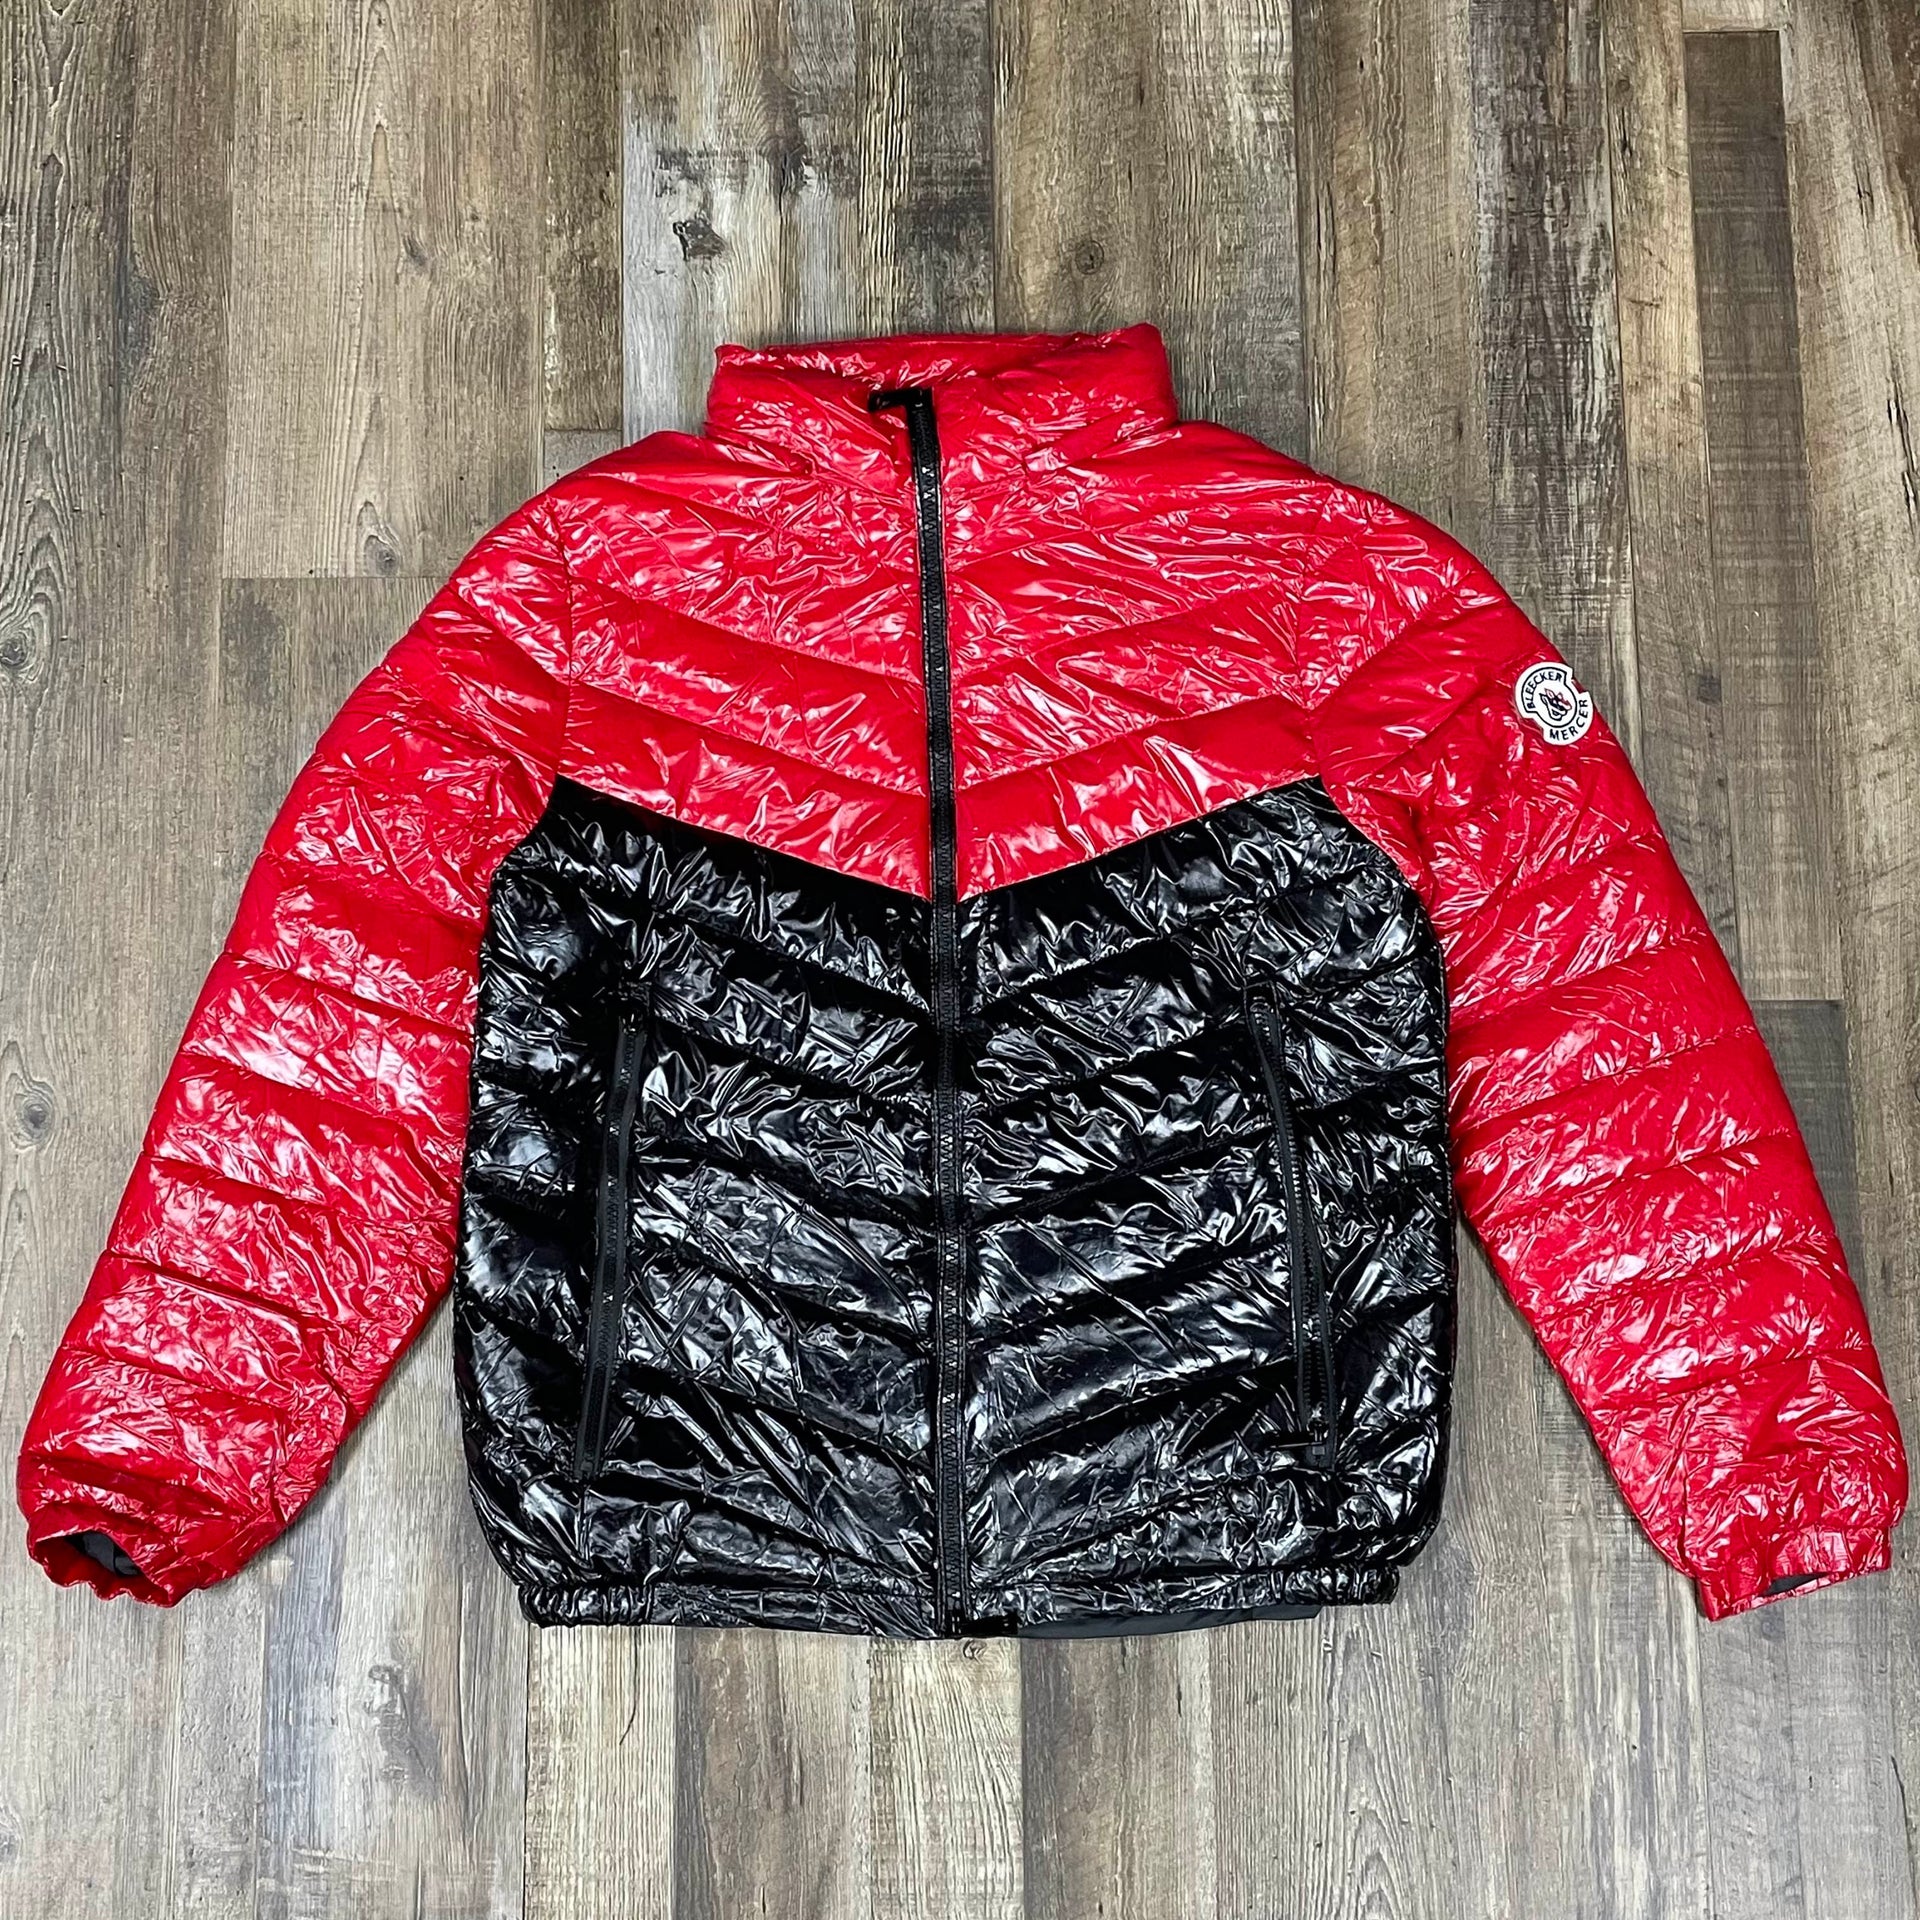 Glossy Metallic Shiny Men’s Puffer Jacket with Removable Hood | Red/Black without the hood